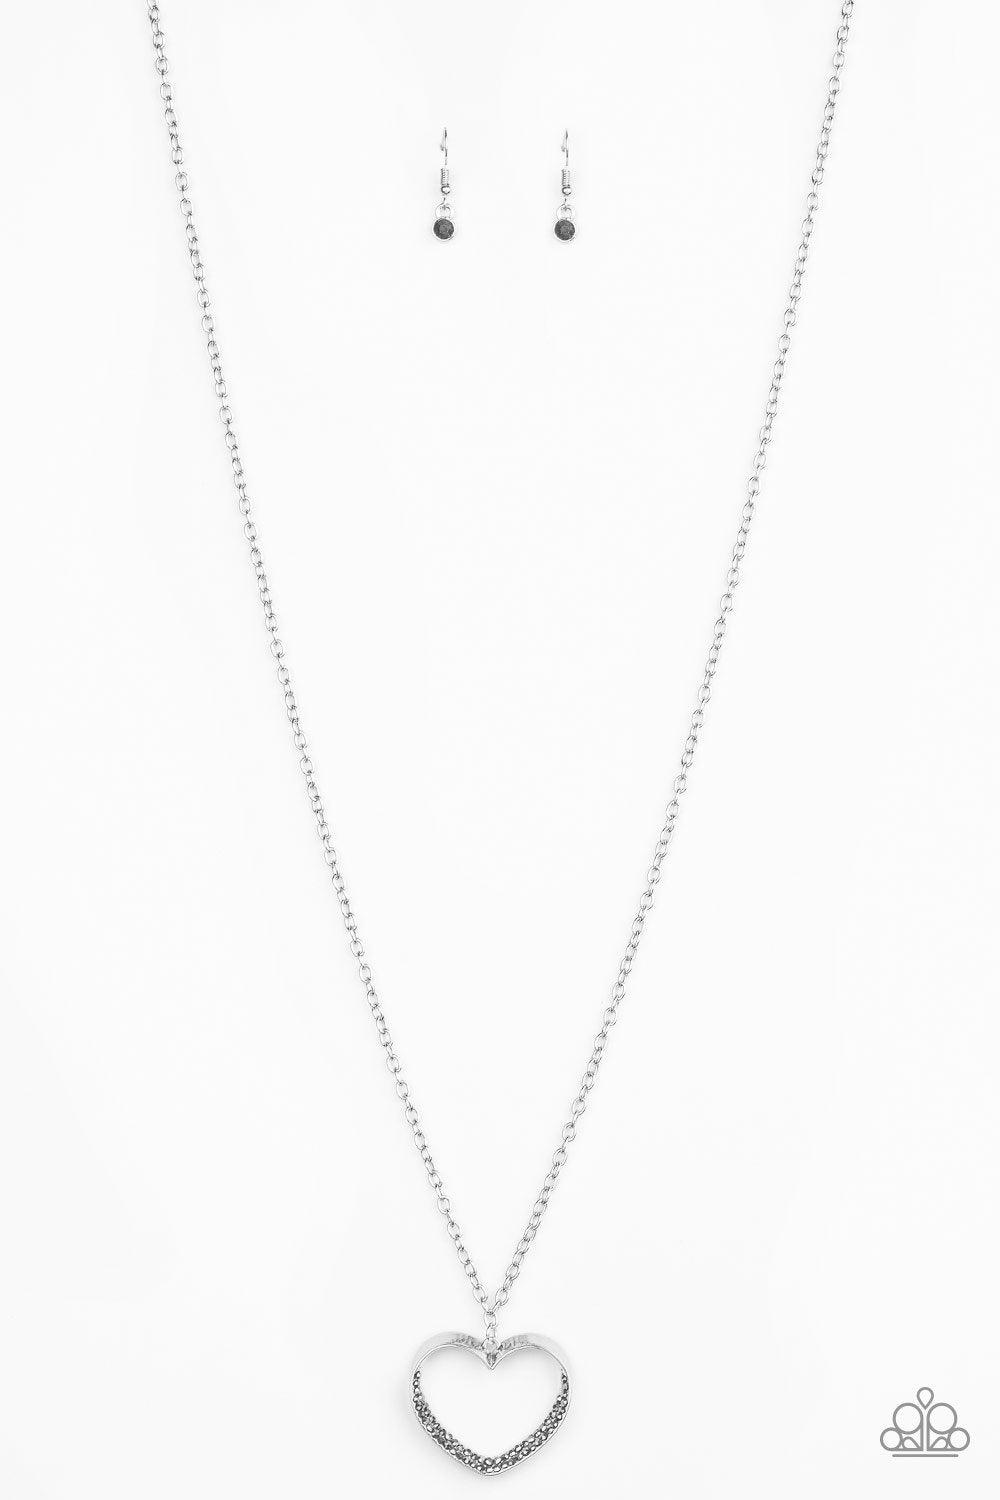 Bighearted Silver Heart Necklace - Paparazzi Accessories-CarasShop.com - $5 Jewelry by Cara Jewels